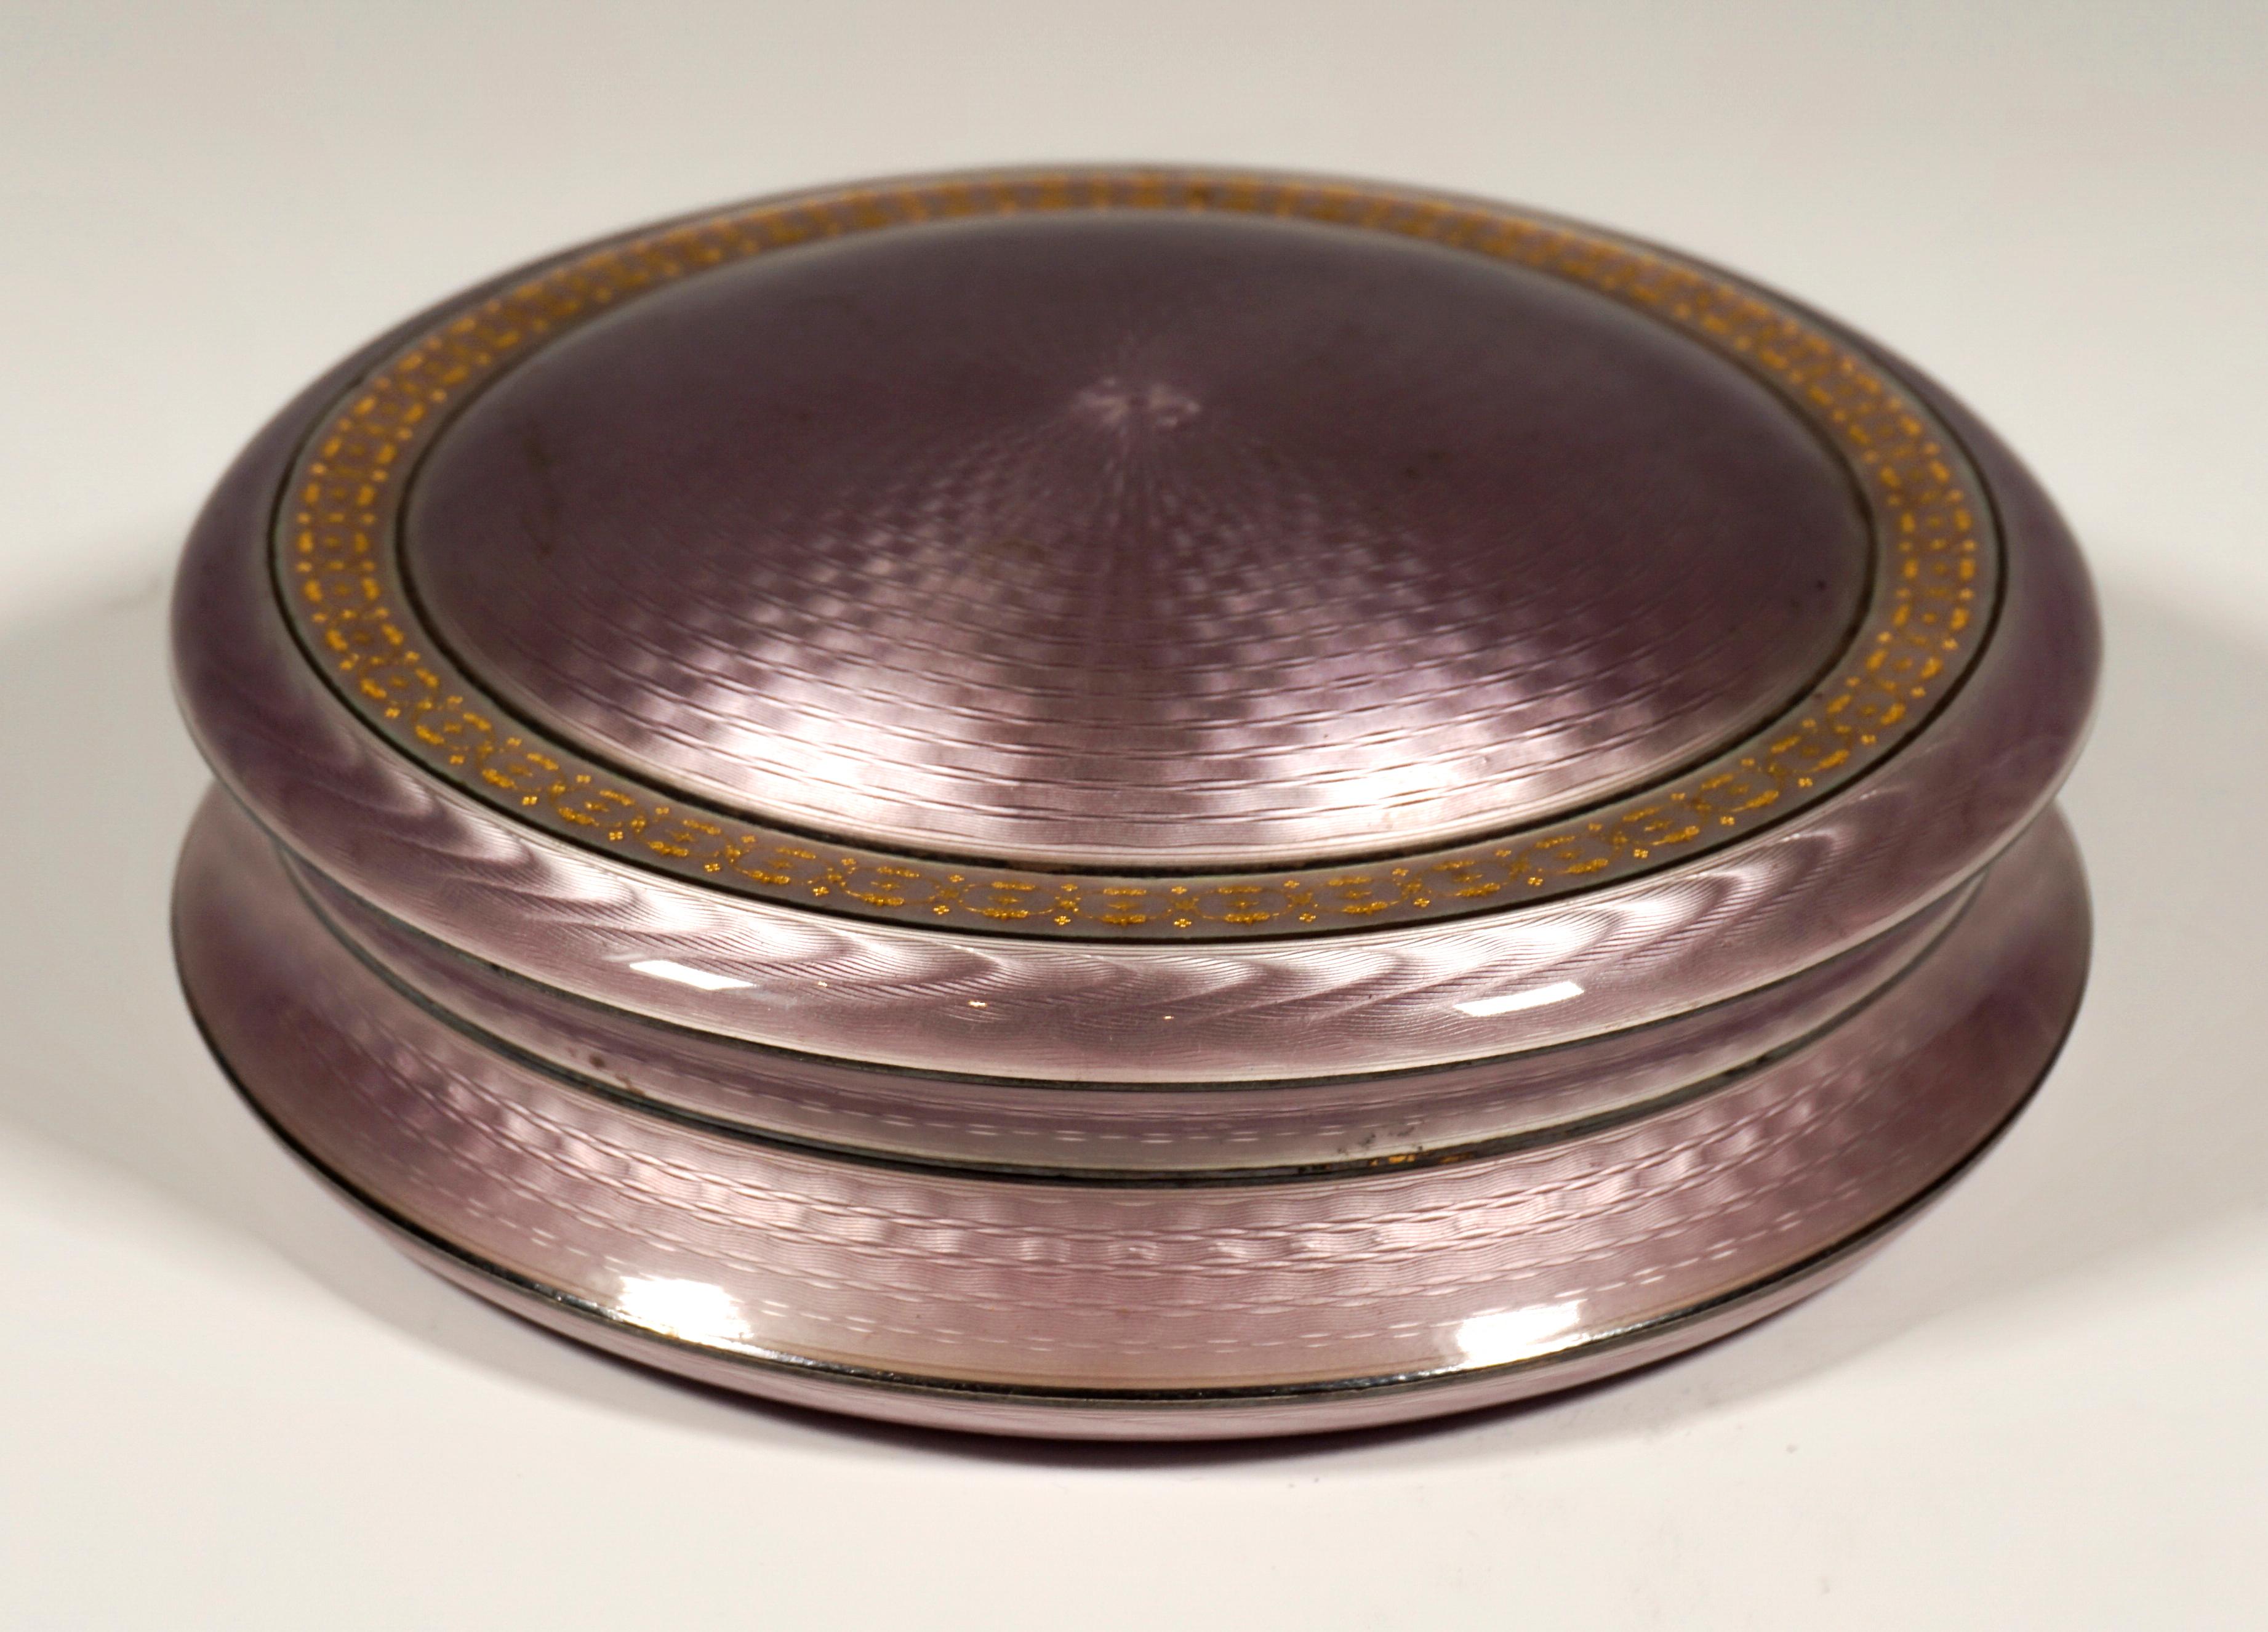 Exquisite enamel box from the period around 1900.
Large silver box, round shape, completely engine-turned and enamelled in lilac, slightly arched lid with wicker-like, interwoven line decoration and circumferential border with gold decoration,